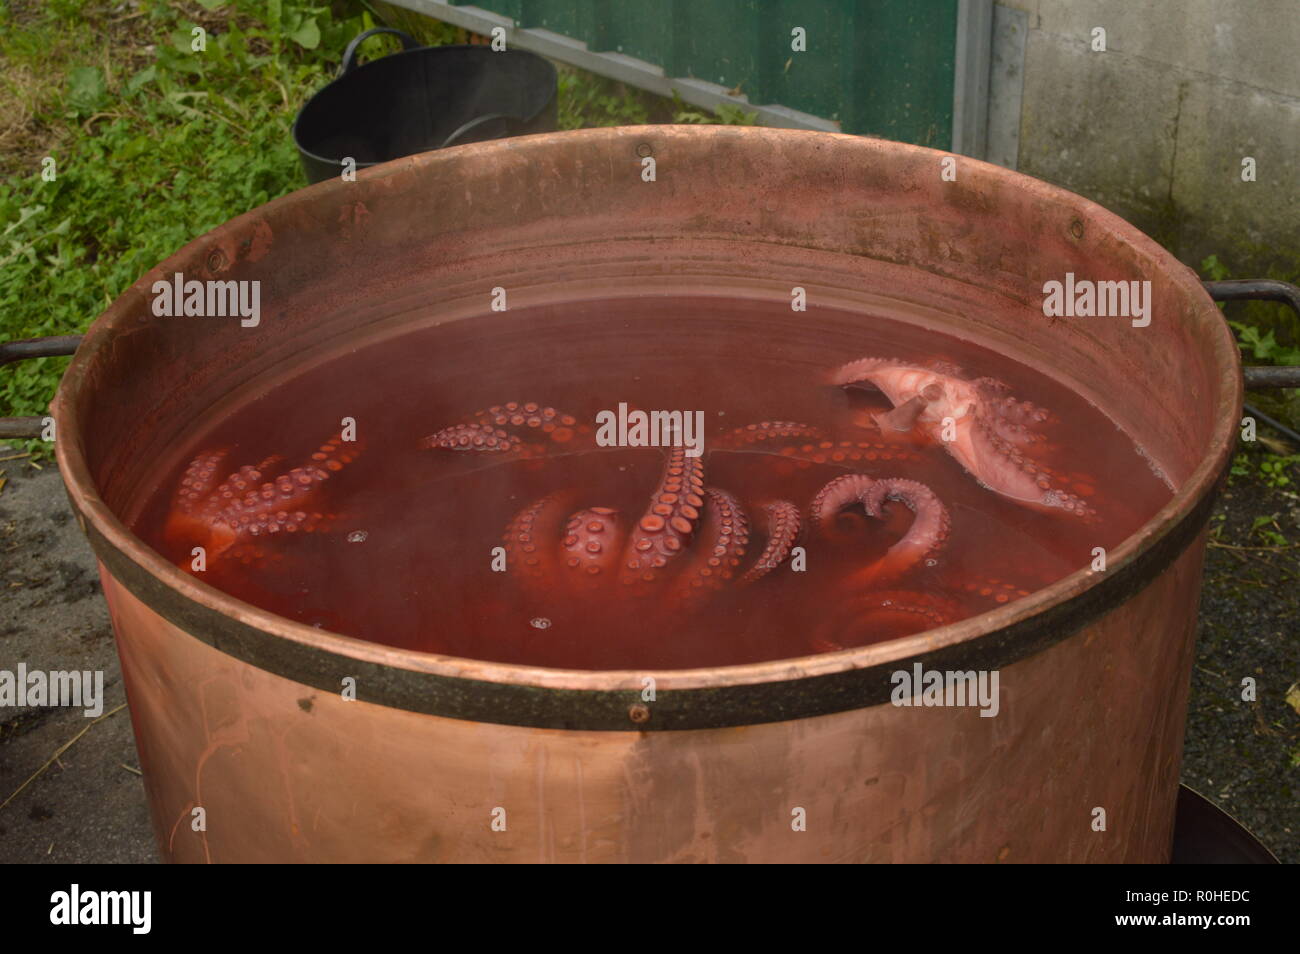 Copper Pot With Octopus Cooking Inside In The Becerrea Octopus Fair. Kitchen, Food, Travel, Vacations. August 3, 2018. Becerrea, Lugo, Galicia, Spain. Stock Photo